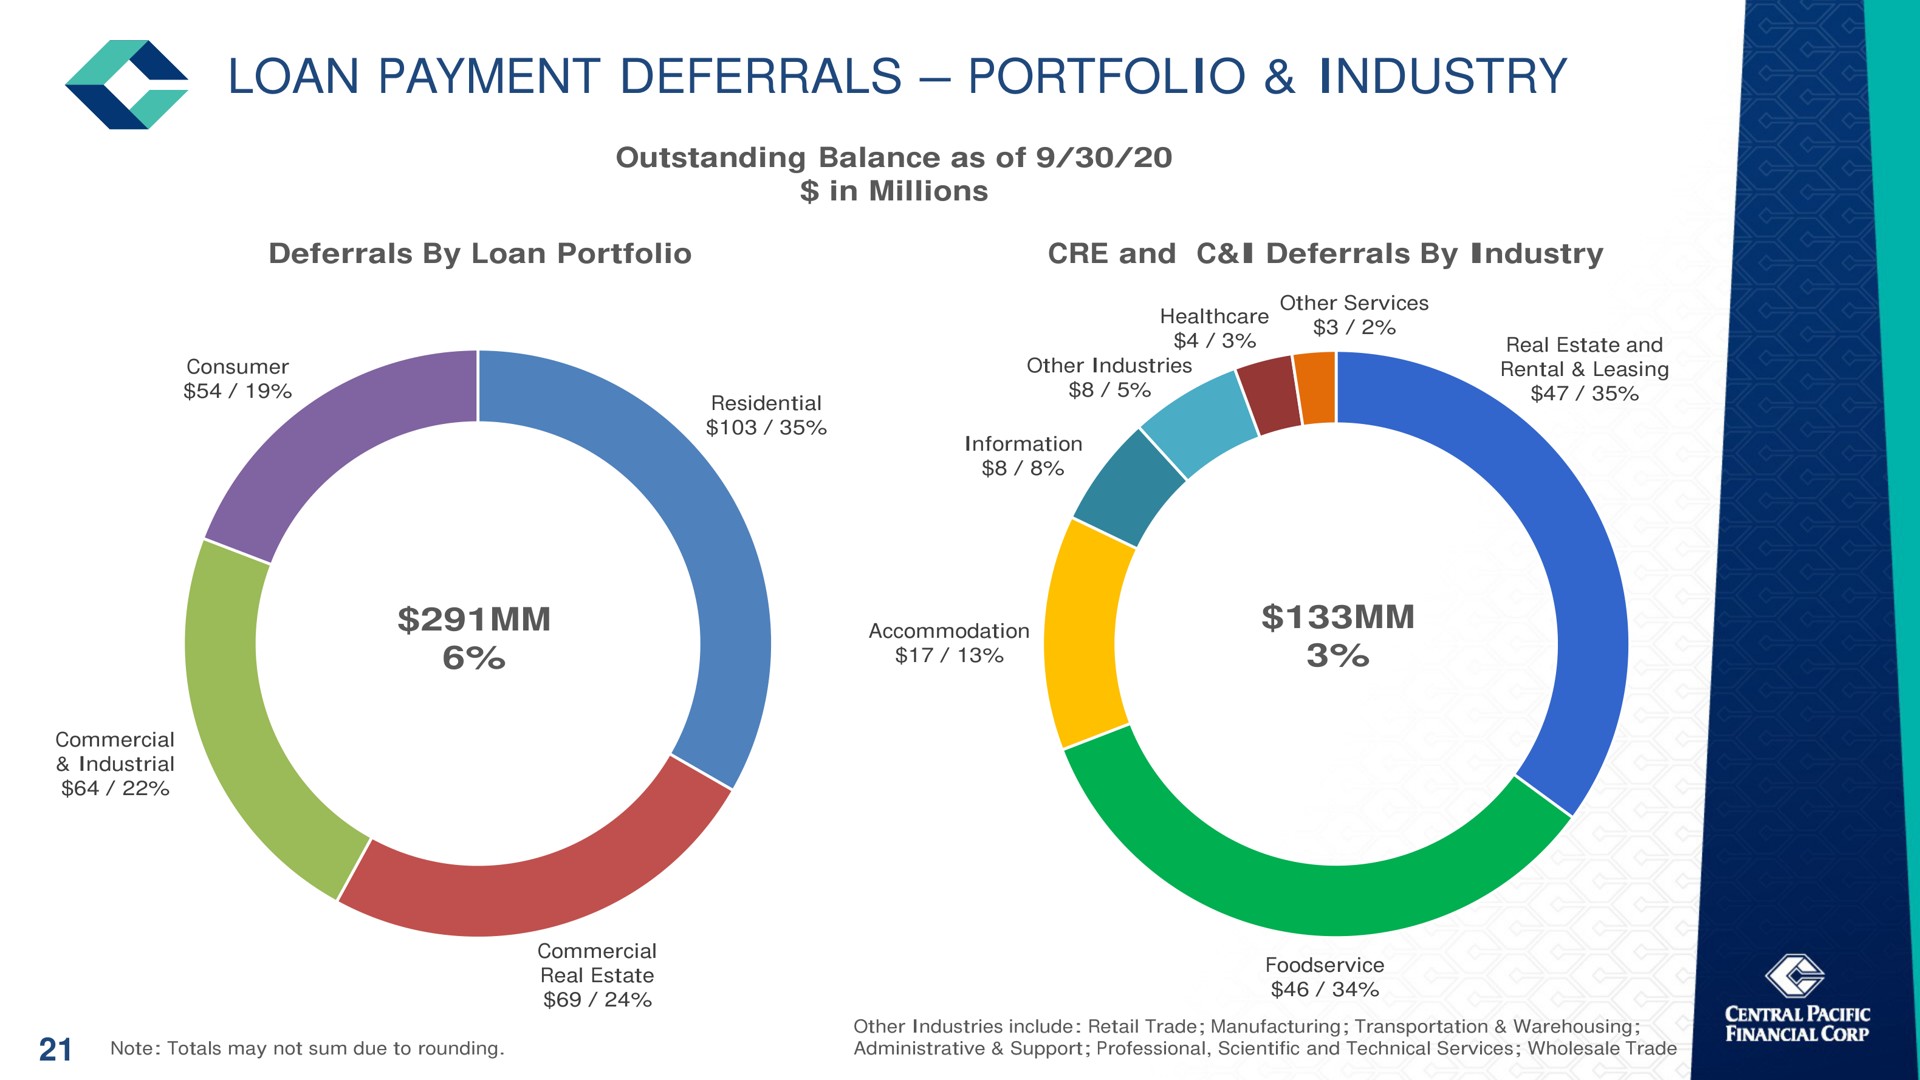 loan payment deferrals portfolio industry | Central Pacific Financial